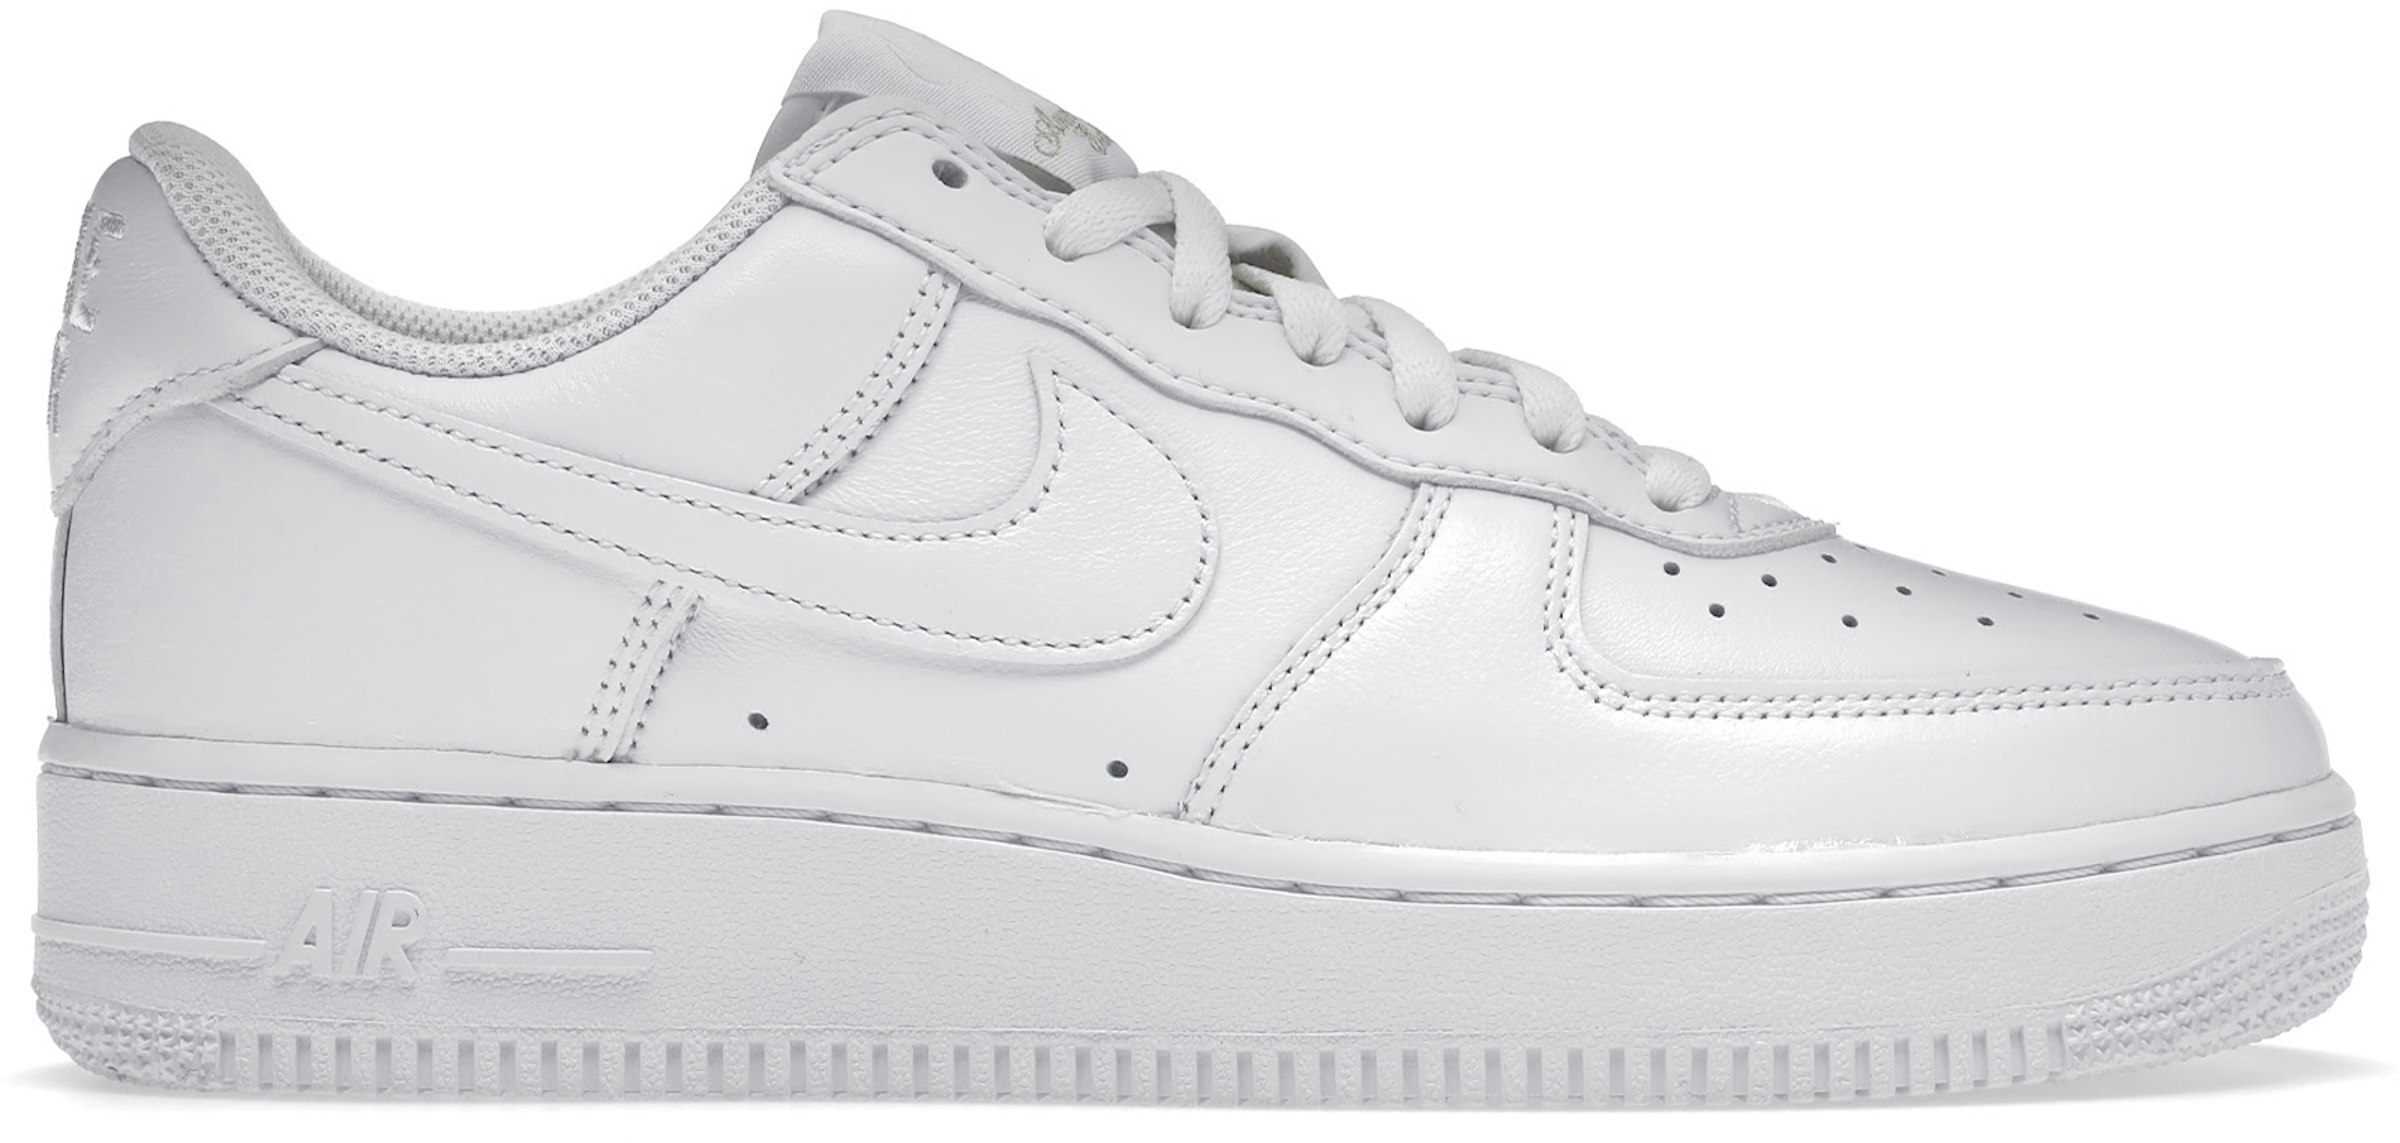 Nike Force 1 '07 Color of the Month Triple White Men's - DJ3911-100 - US